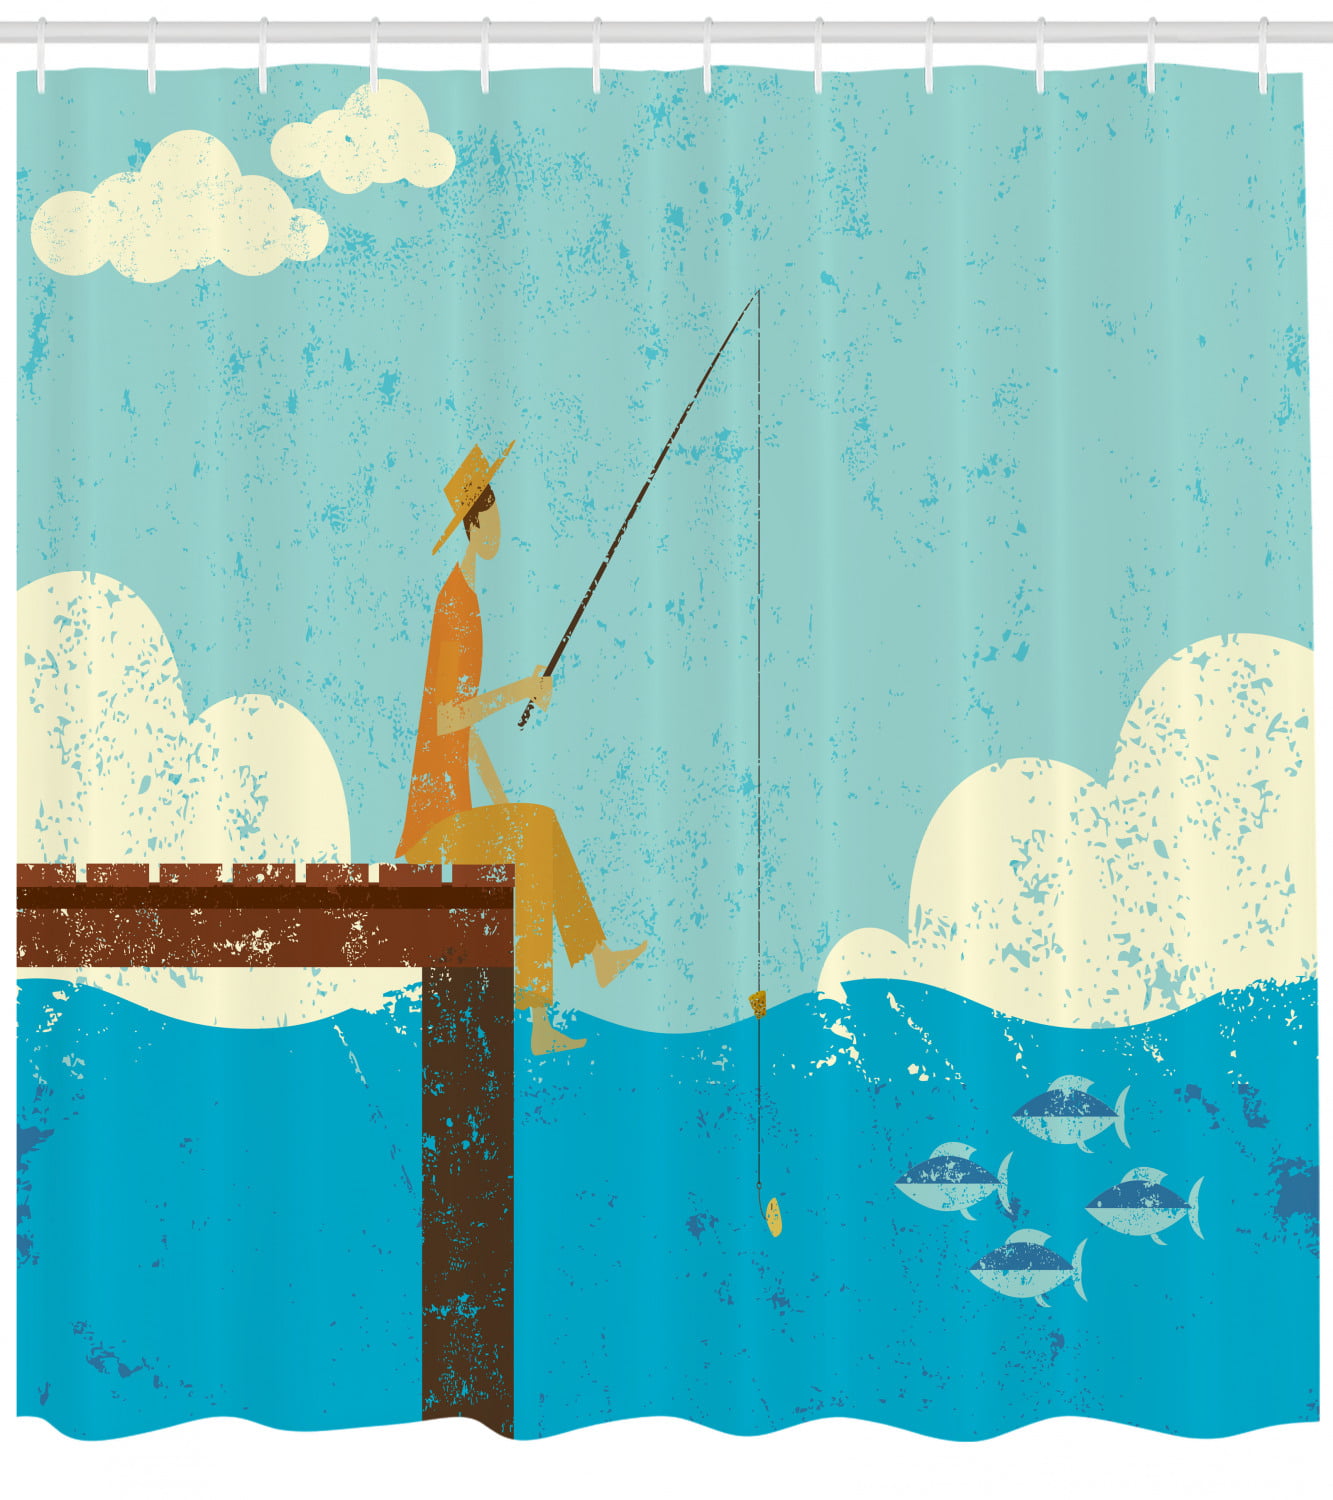 Details about   Fishing Shower Curtain Fishing Tool on The Wooden Pier By The Lake Bath Curtain 